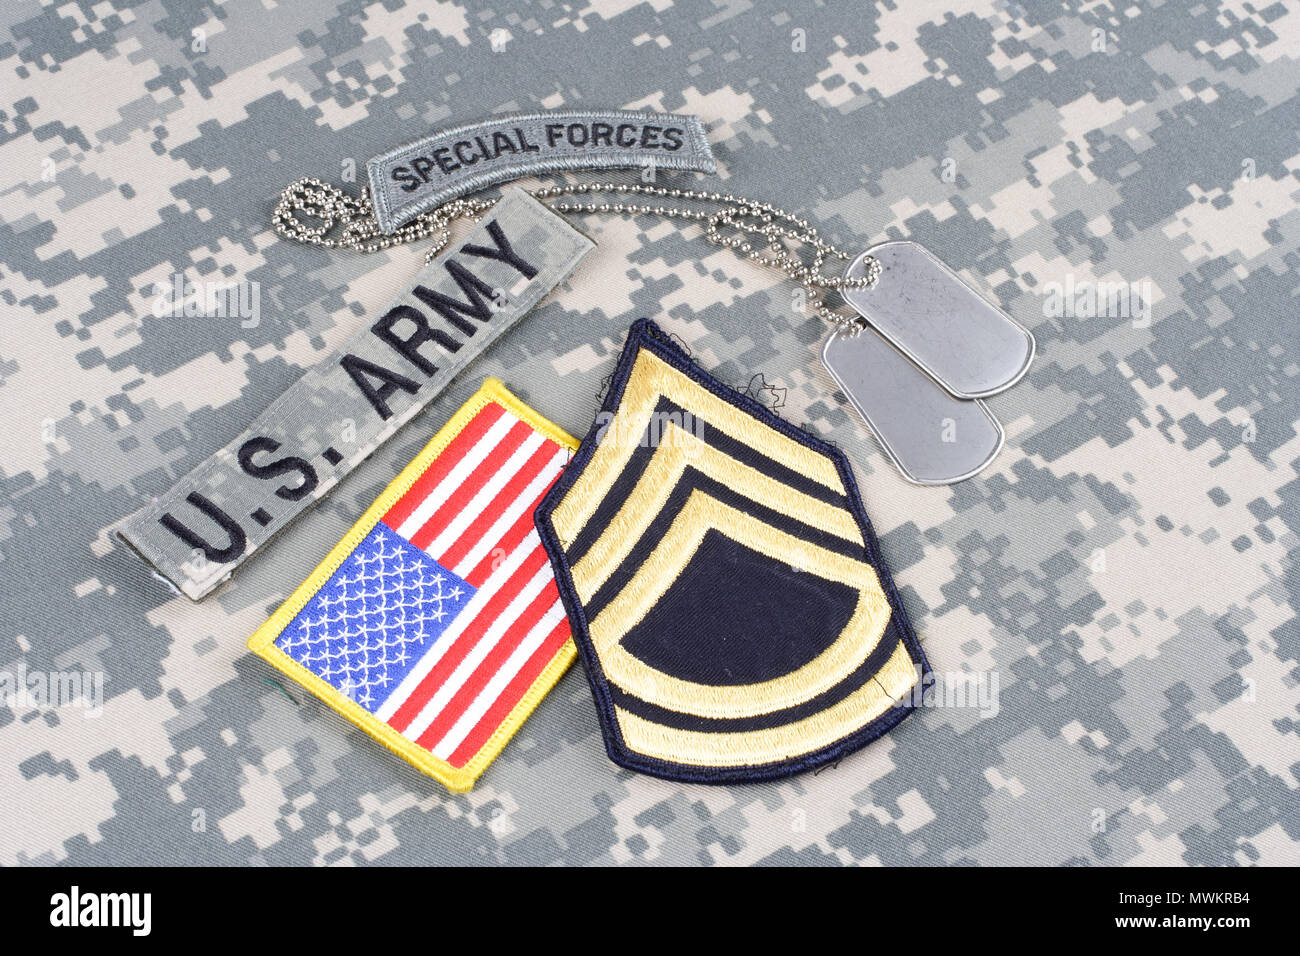 KIEV, UKRAINE - August 21, 2015. US ARMY special forces insignia on camouflage uniform Stock Photo